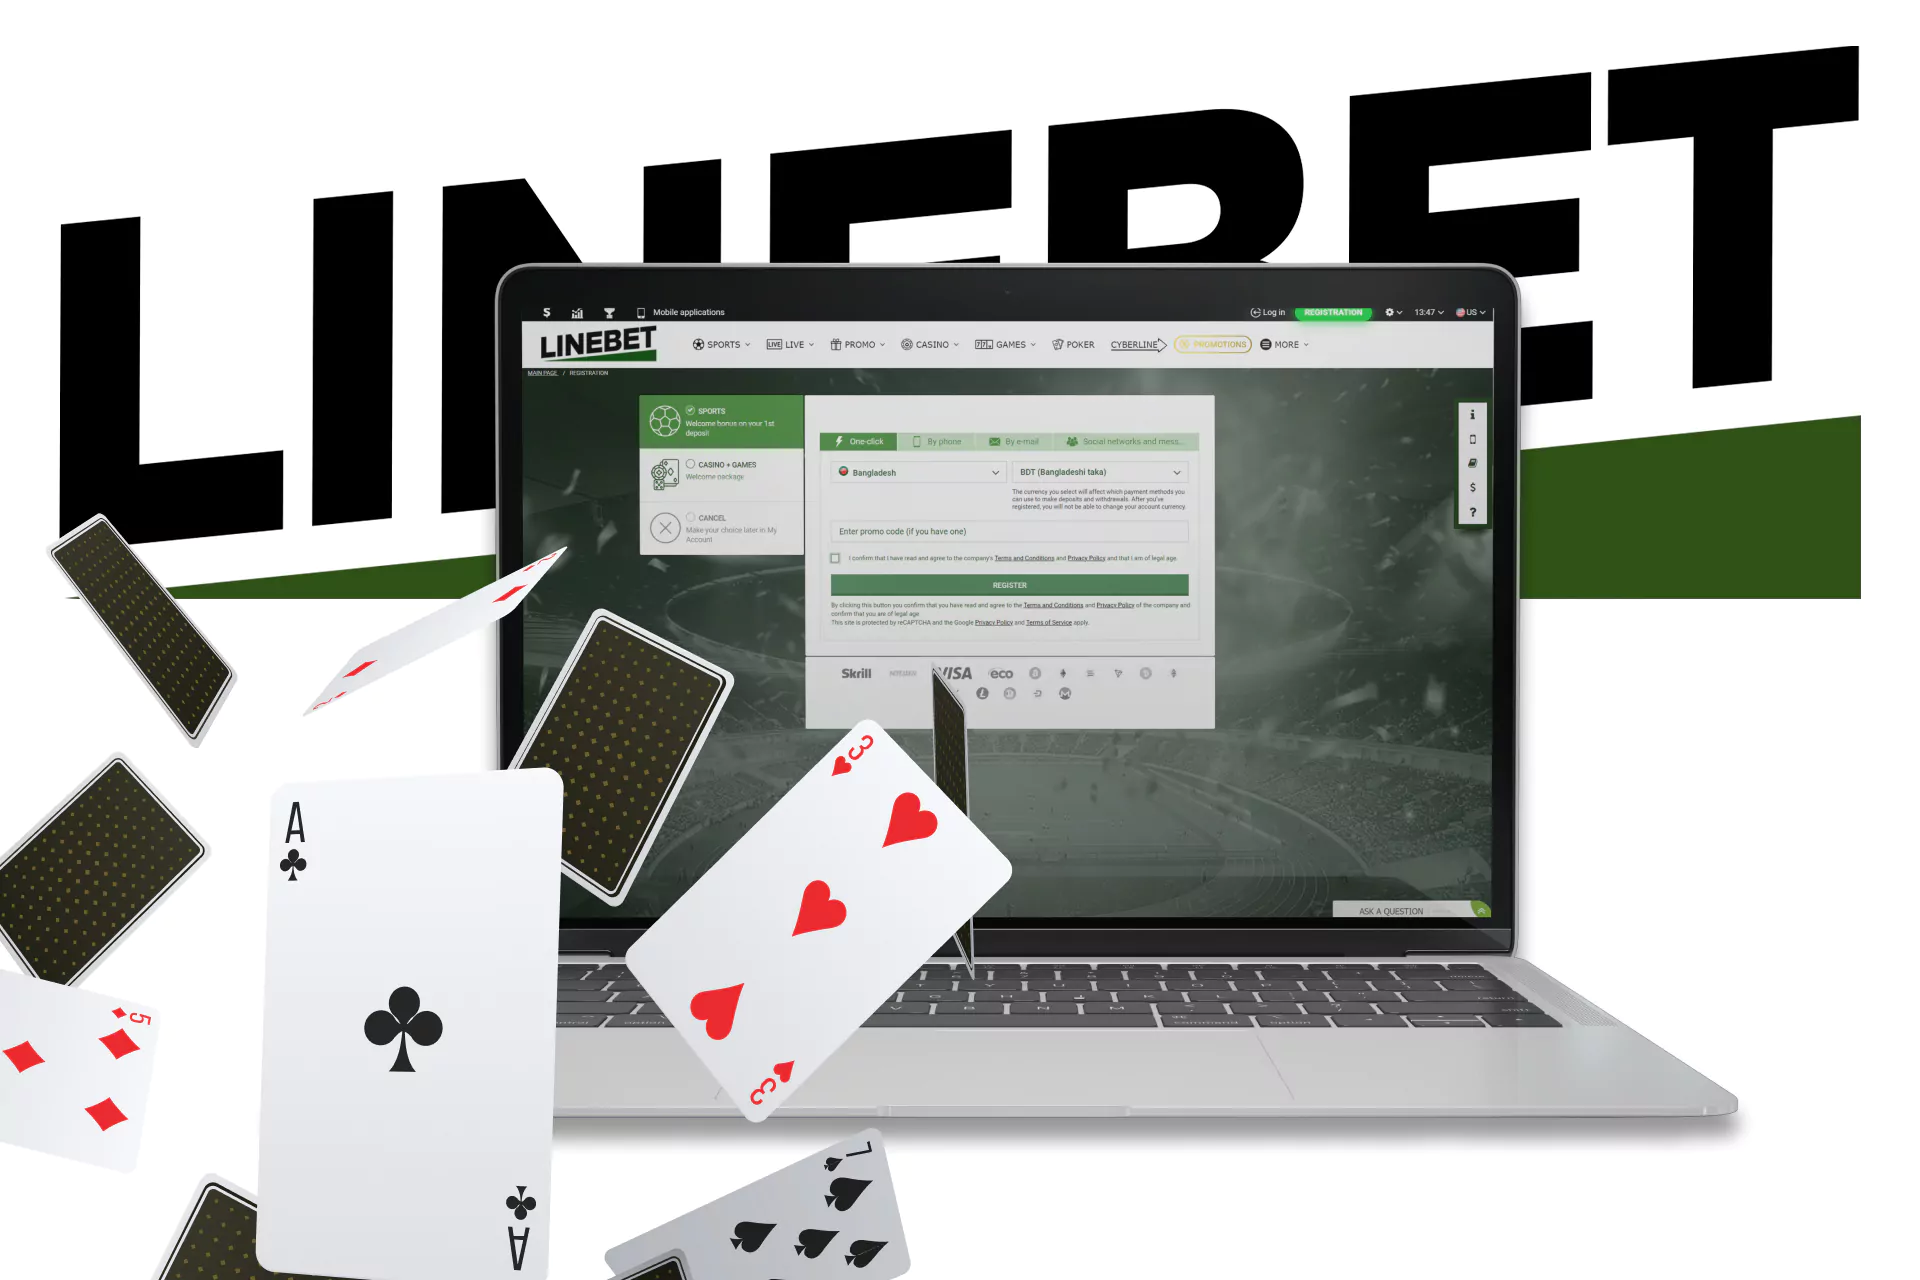 With these instructions, learn how to quickly start playing Andar Bahar on Linebet.